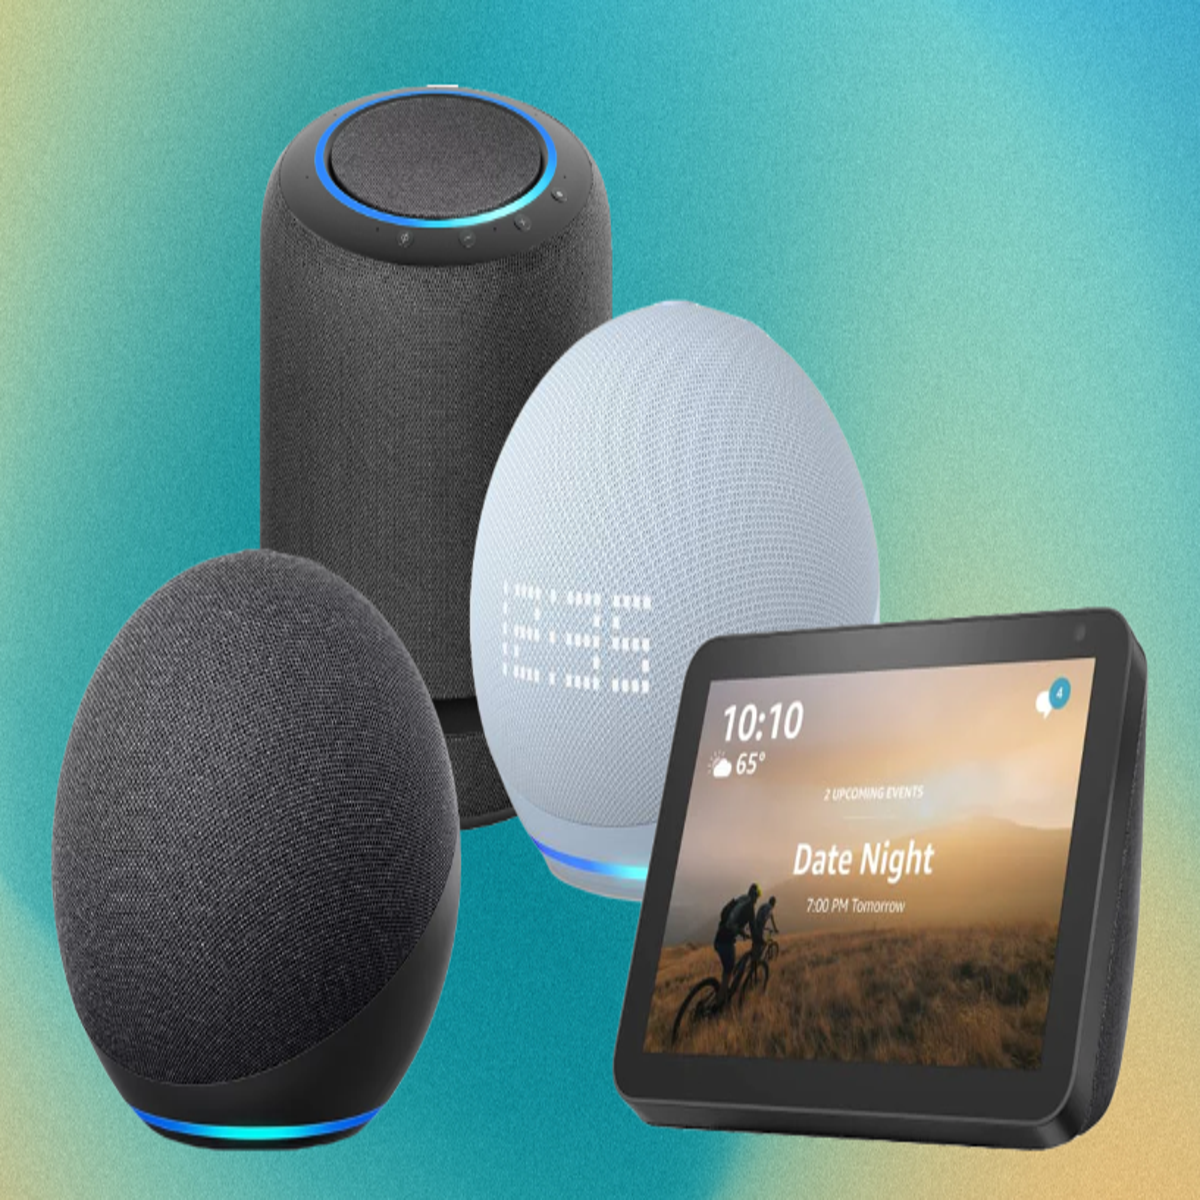 23 Smart Home Devices and Tech Gadgets for 2023